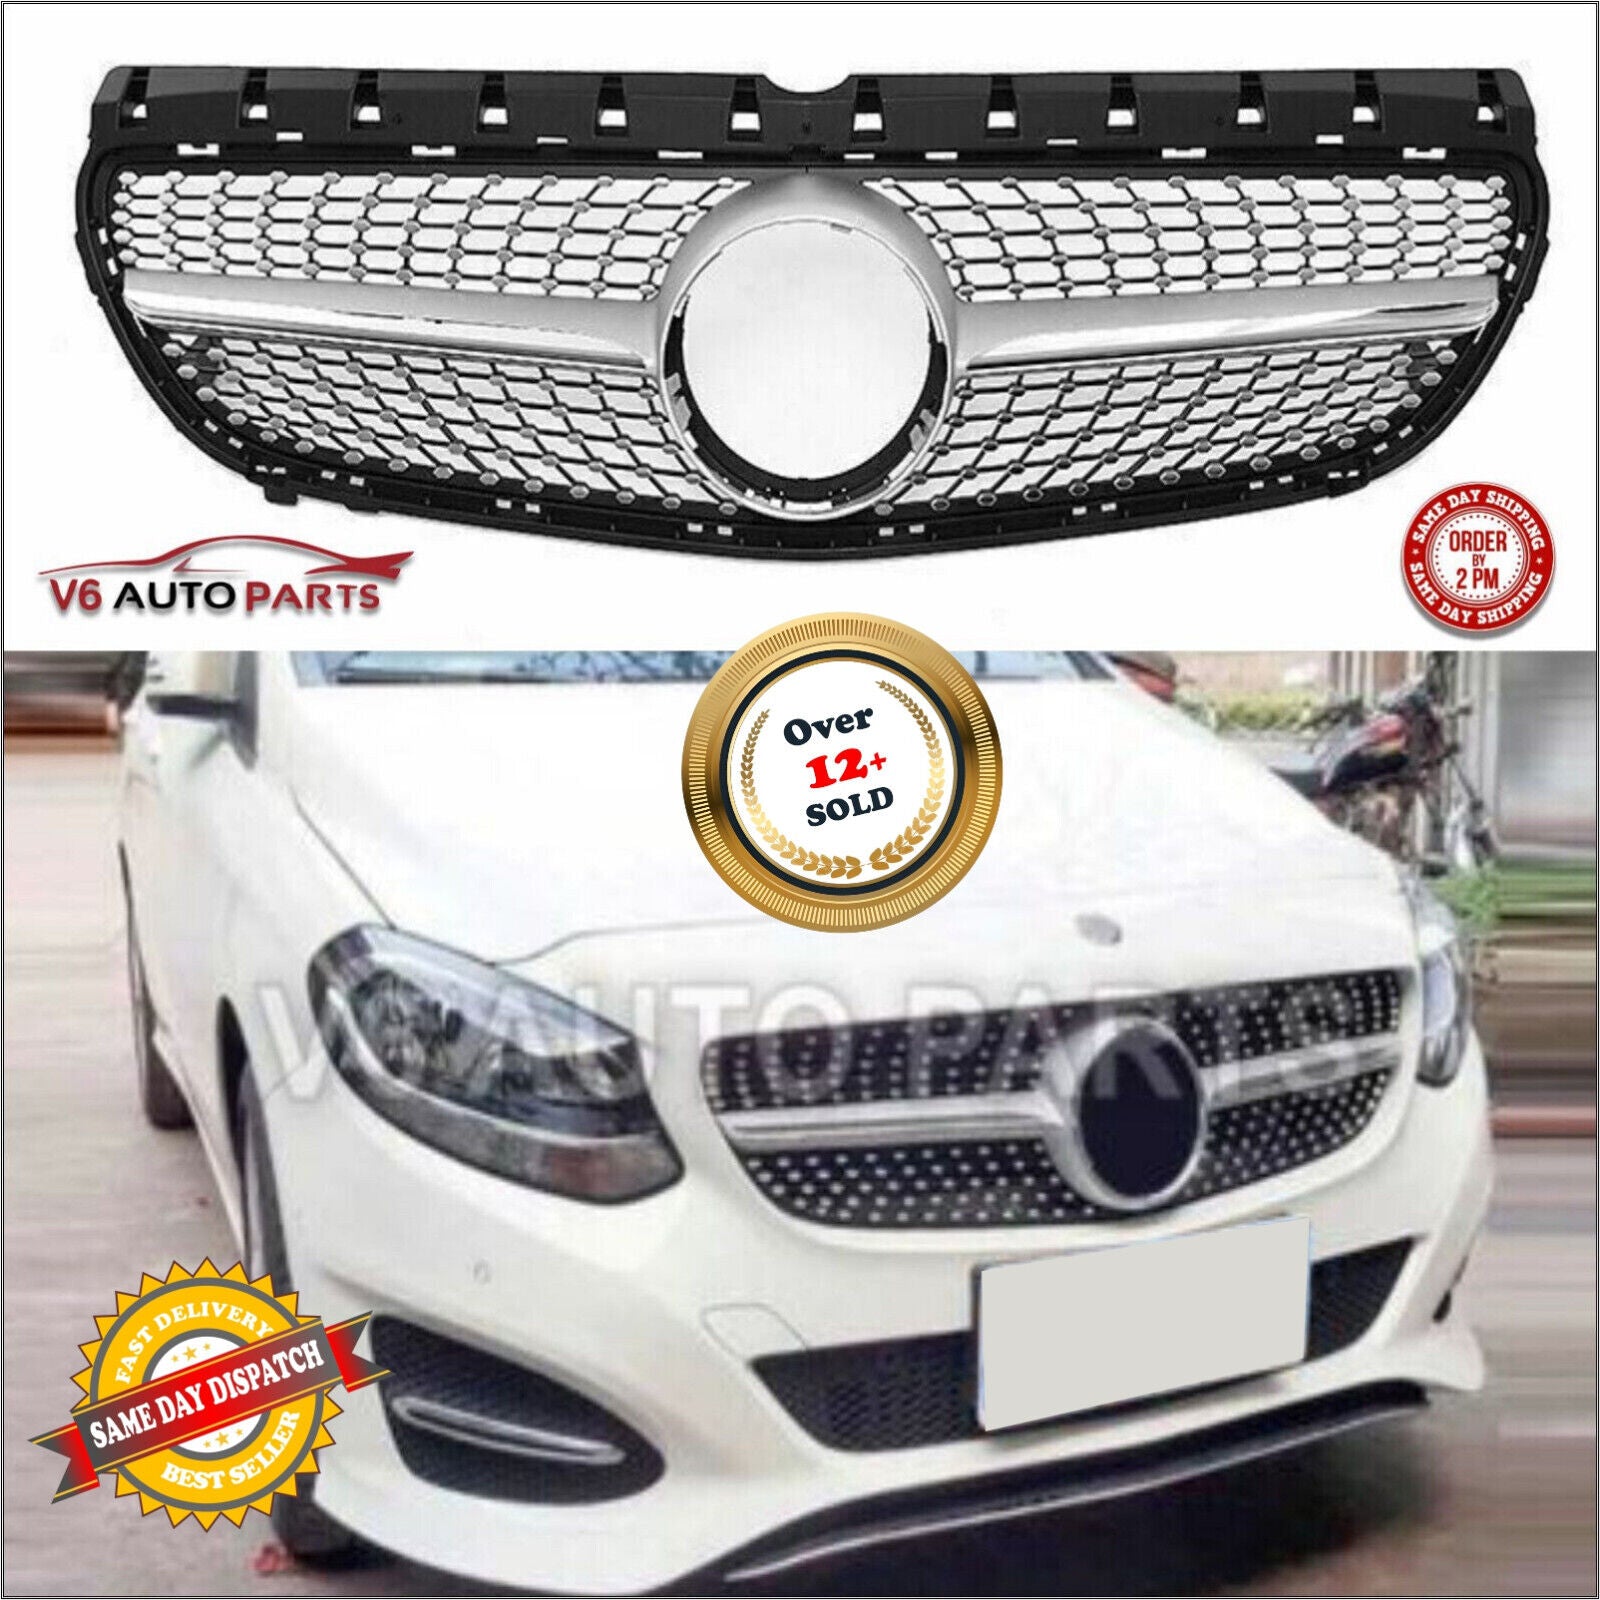 For Mercedes B-Class W246 B250 300 B180CDI Front Bumper AMG Style Grille 2015-18